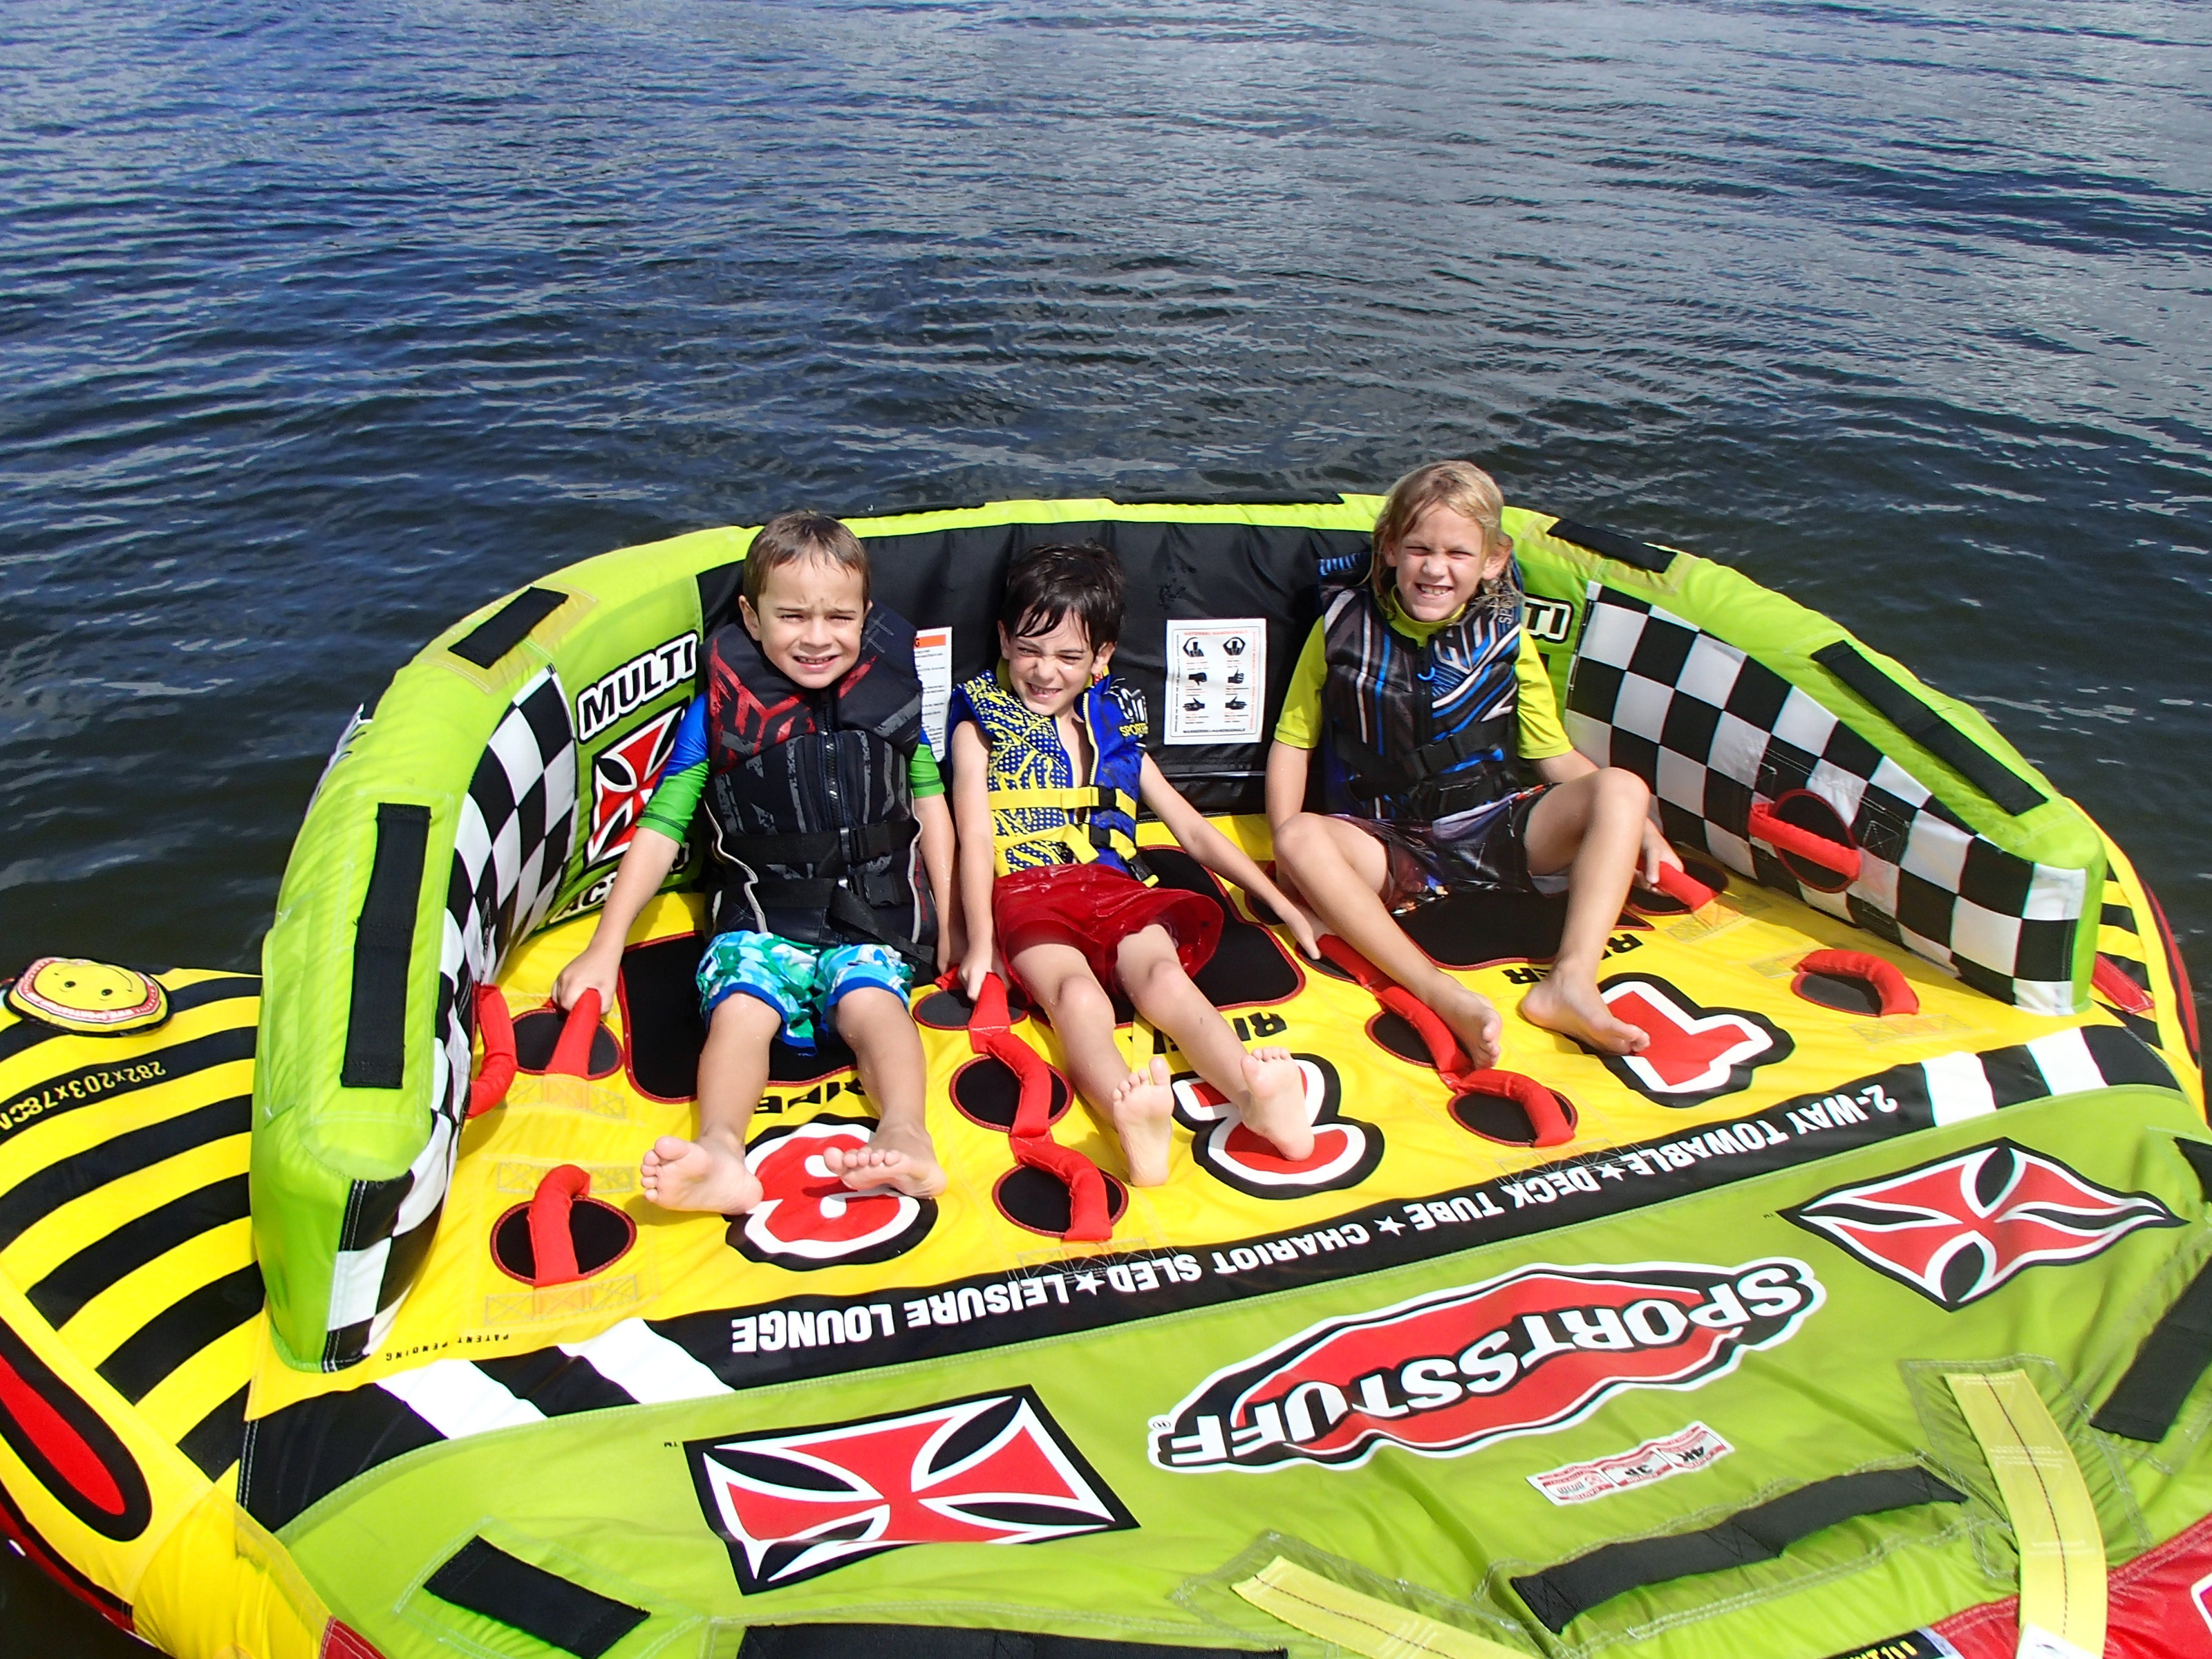 Tubing at CB Smith Park is just one of the many exciting field trips campers at Camp Sagemont enjoy each summer.